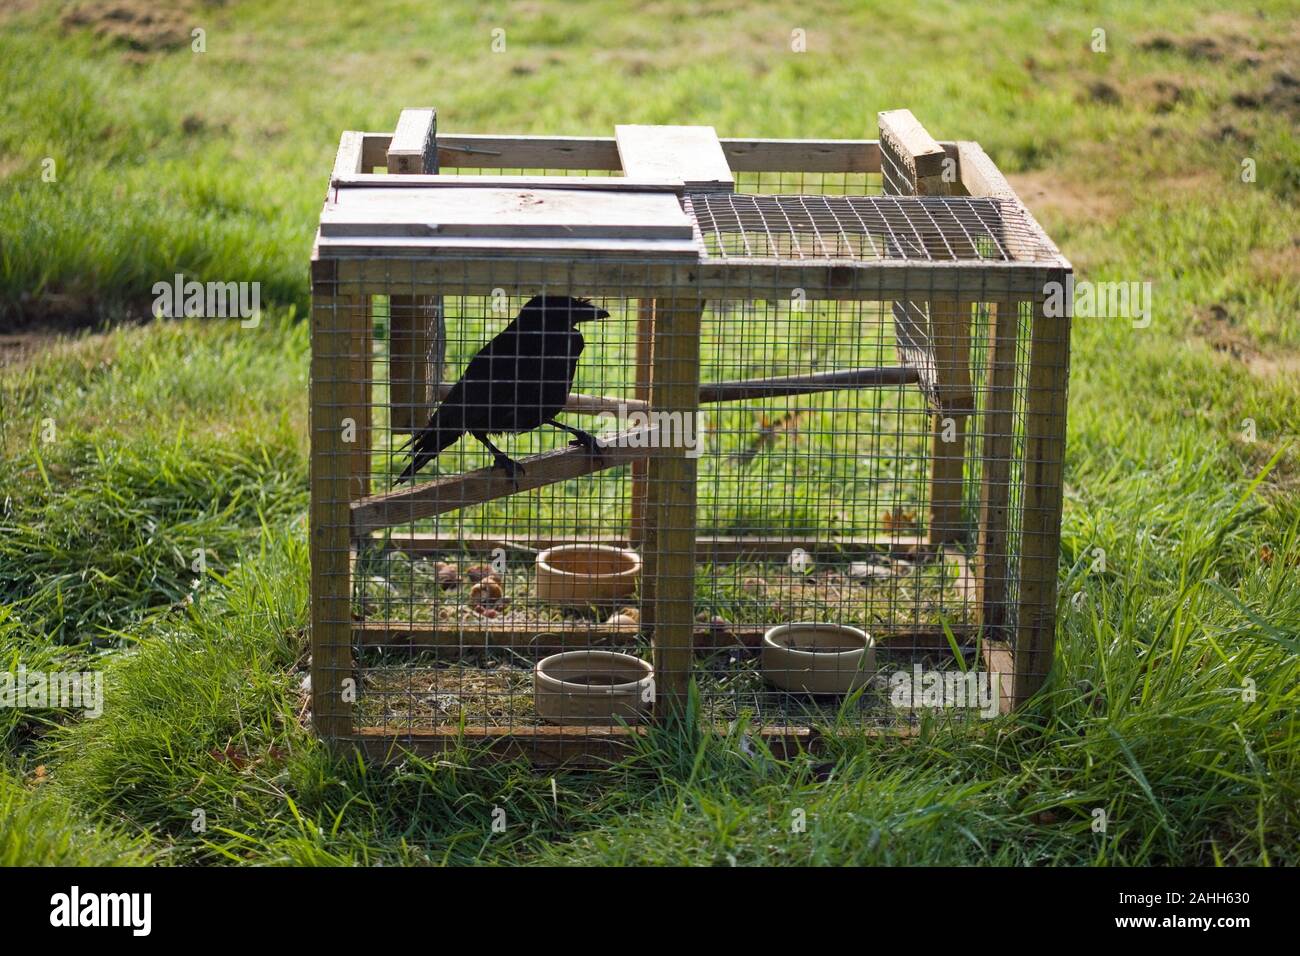 LARSEN TRAP used for controlling numbers of corvids (crows), considered as pests or 'vermin' by game managed estates. Live decoy bird used. Legal. Stock Photo